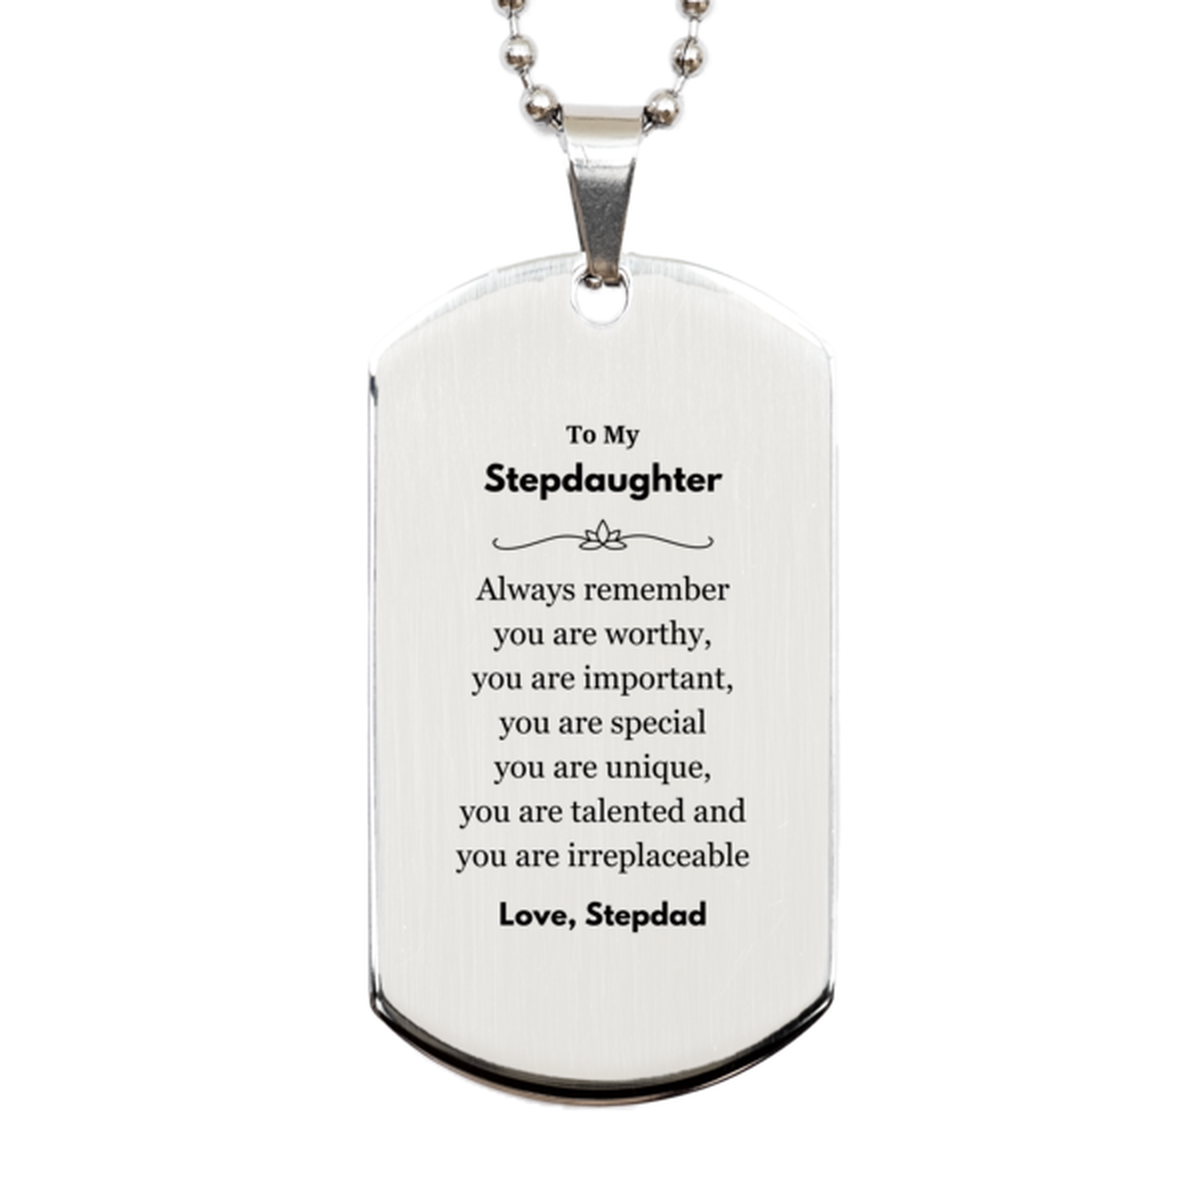 Stepdaughter Birthday Gifts from Stepdad, Inspirational Silver Dog Tag for Stepdaughter Christmas Graduation Gifts for Stepdaughter Always remember you are worthy, you are important. Love, Stepdad